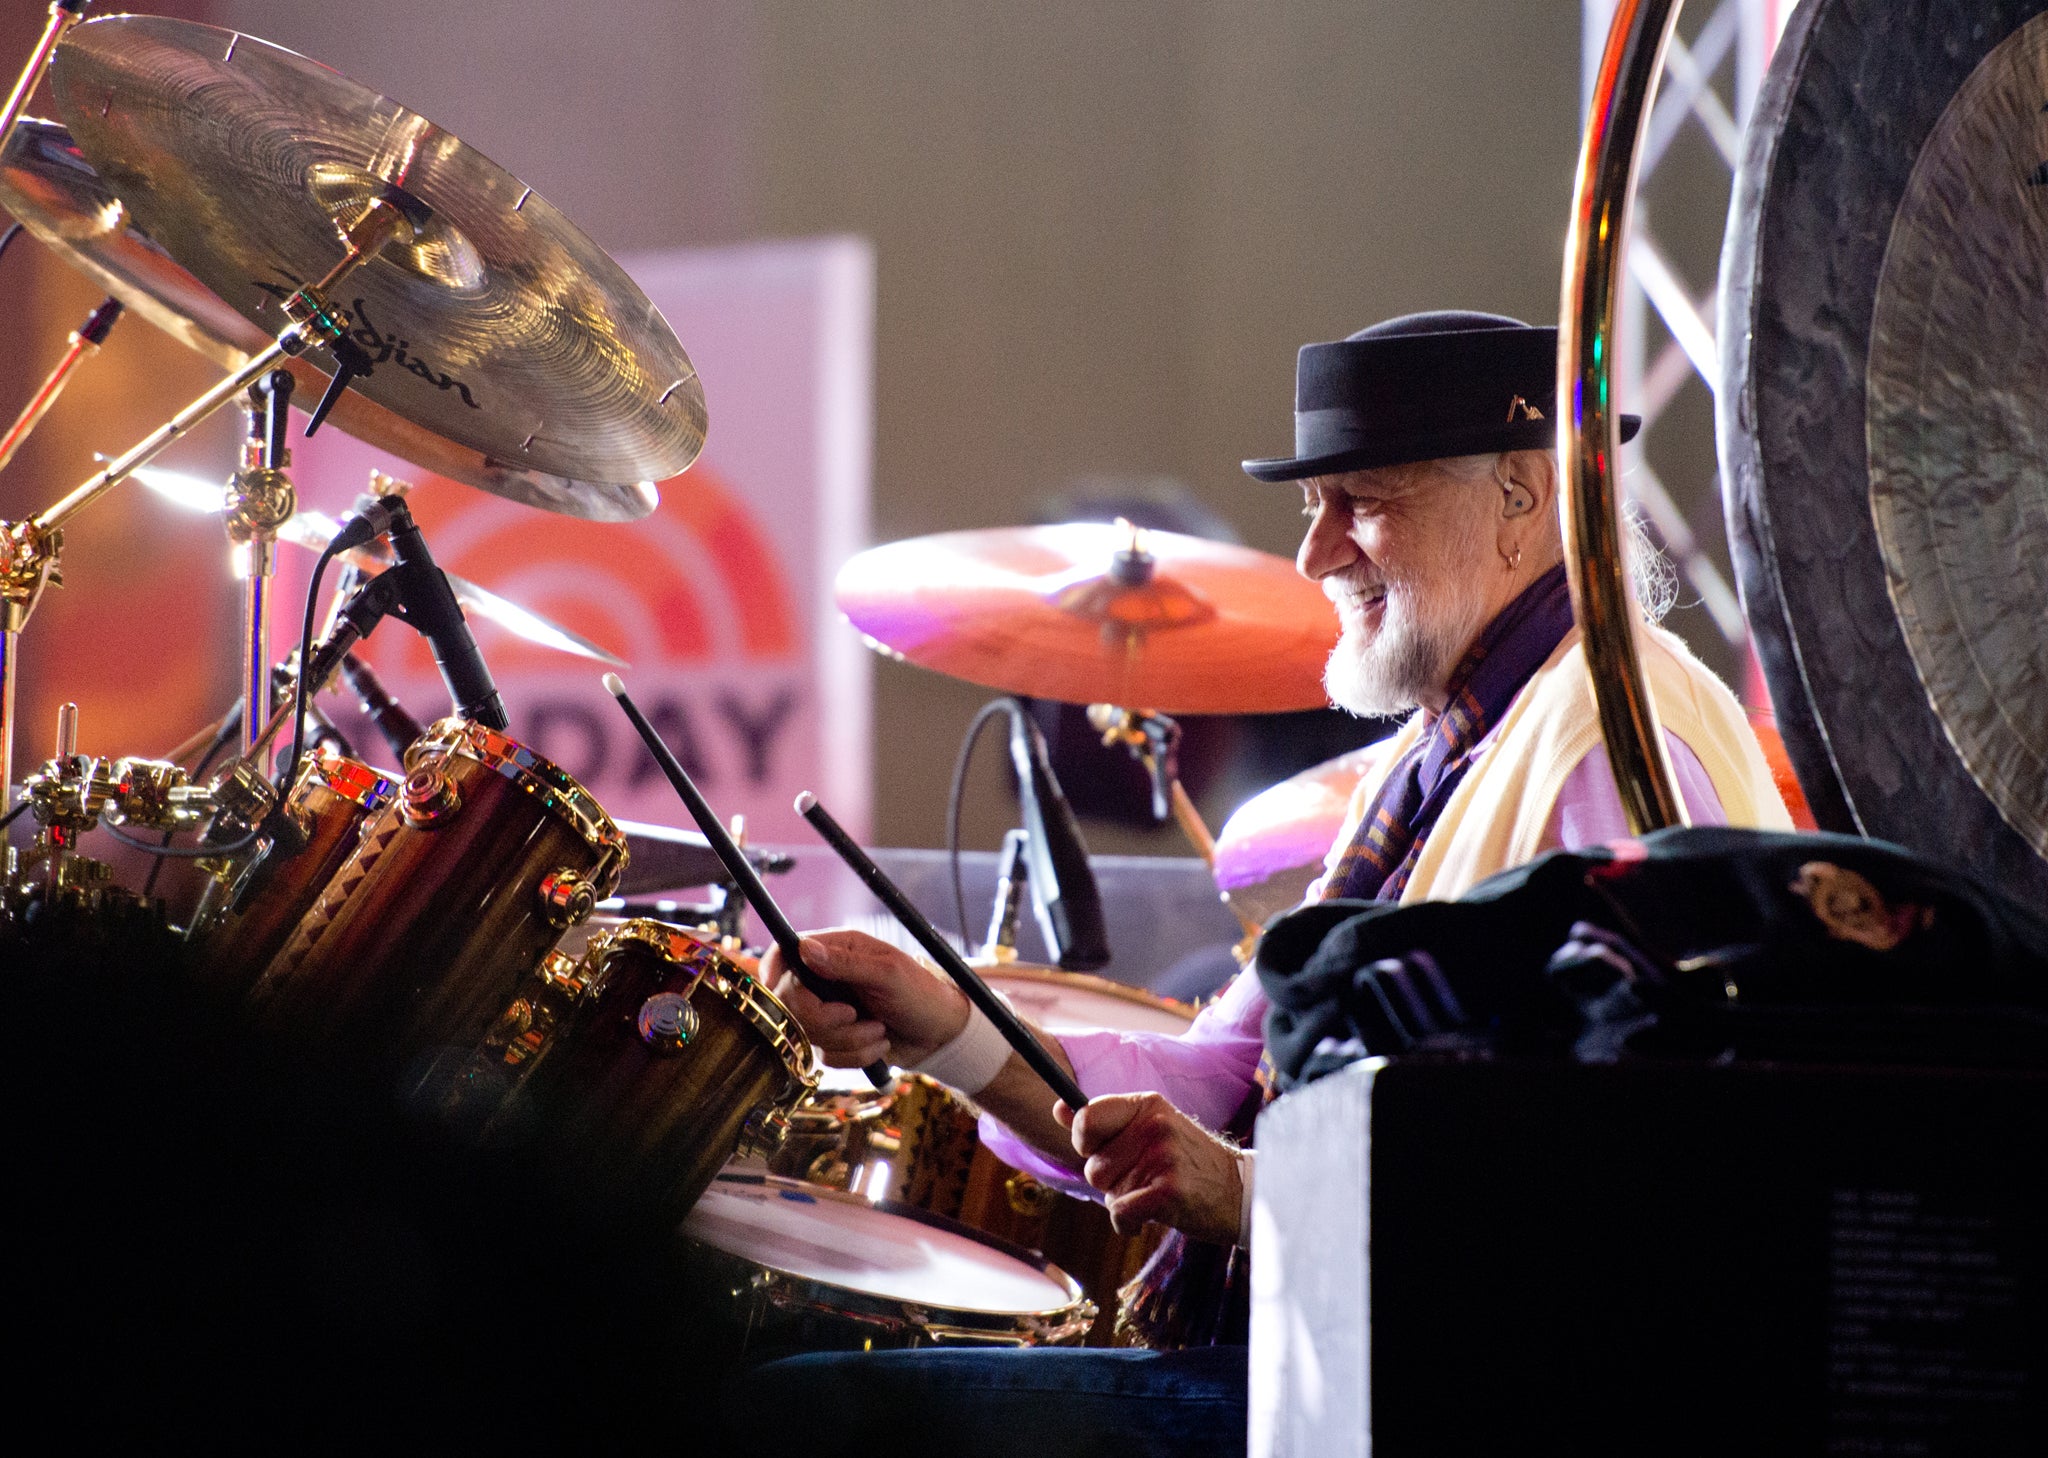 Mick Fleetwood performs on stage at the NBC's Today show in 2014